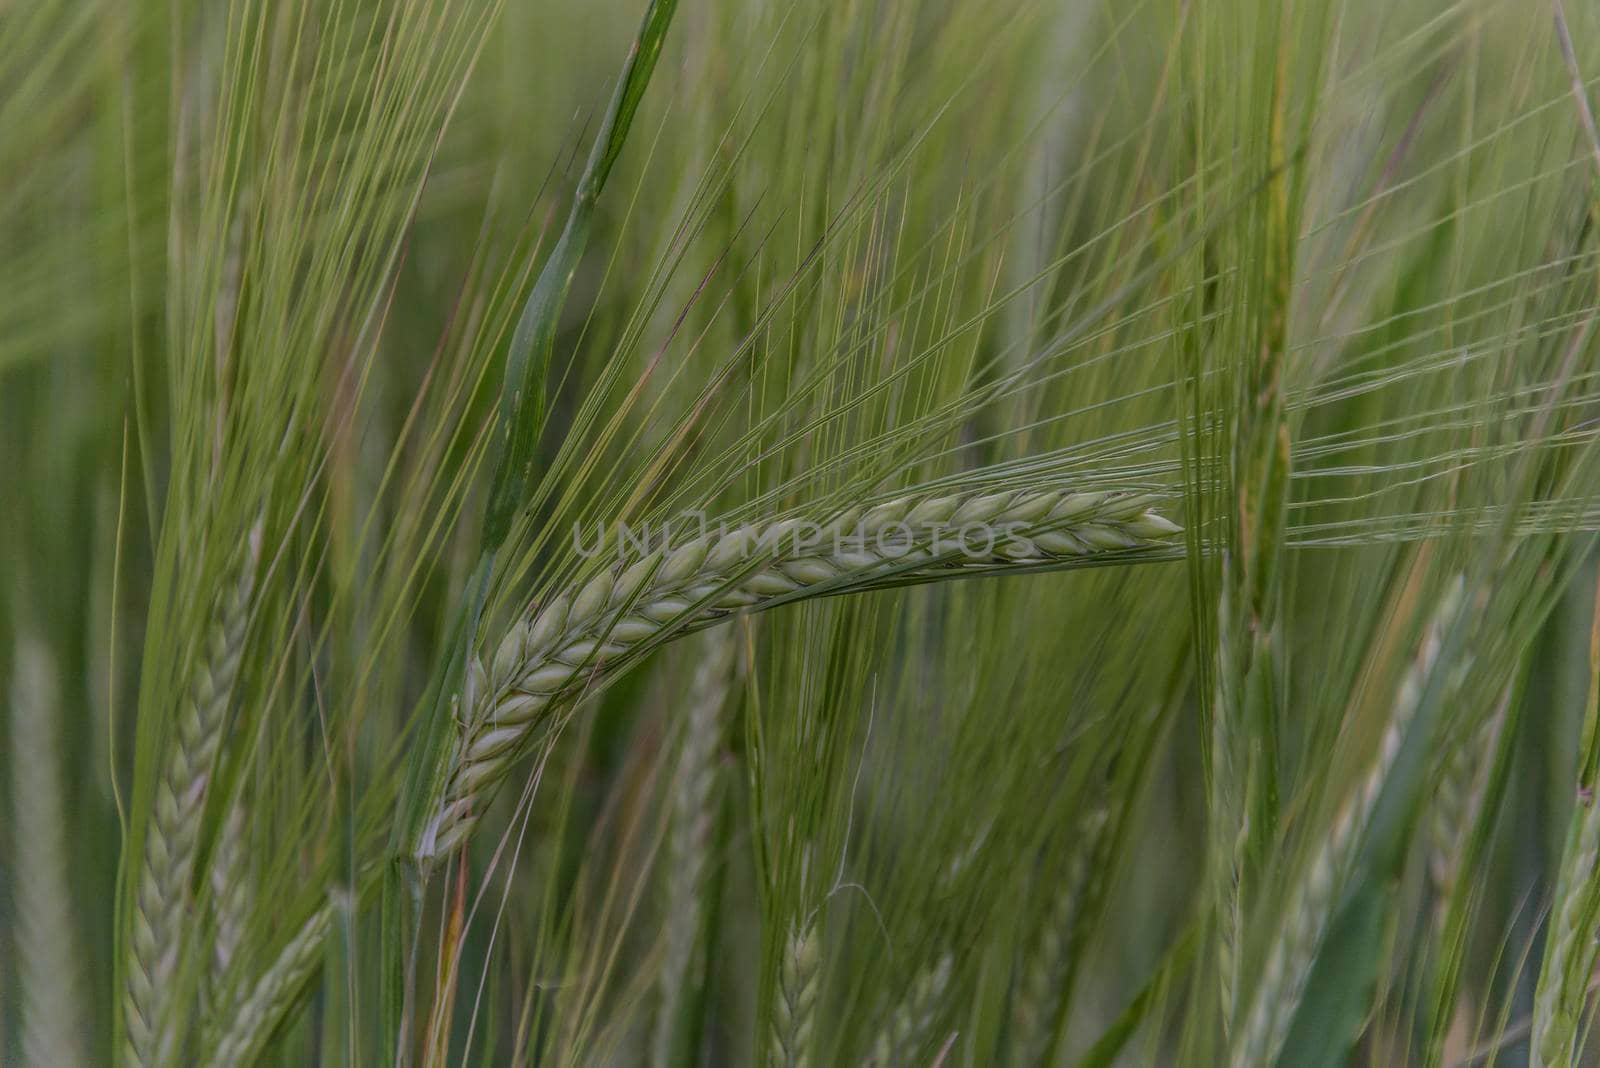 Young green barley corns growing in a field